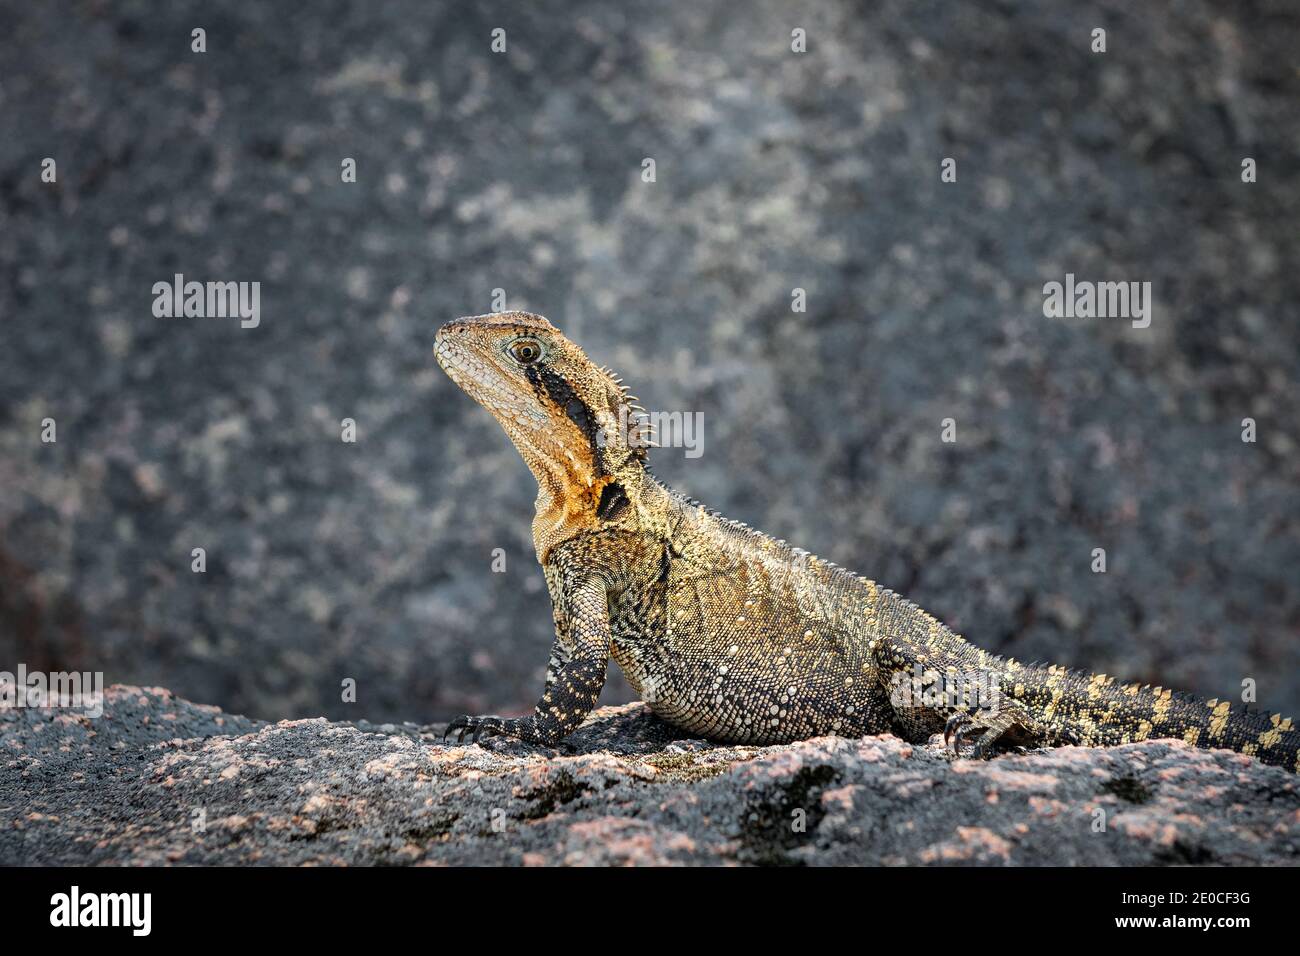 Beautifully coloured Australian Water Dragon basking well camouflaged on a rock. Stock Photo